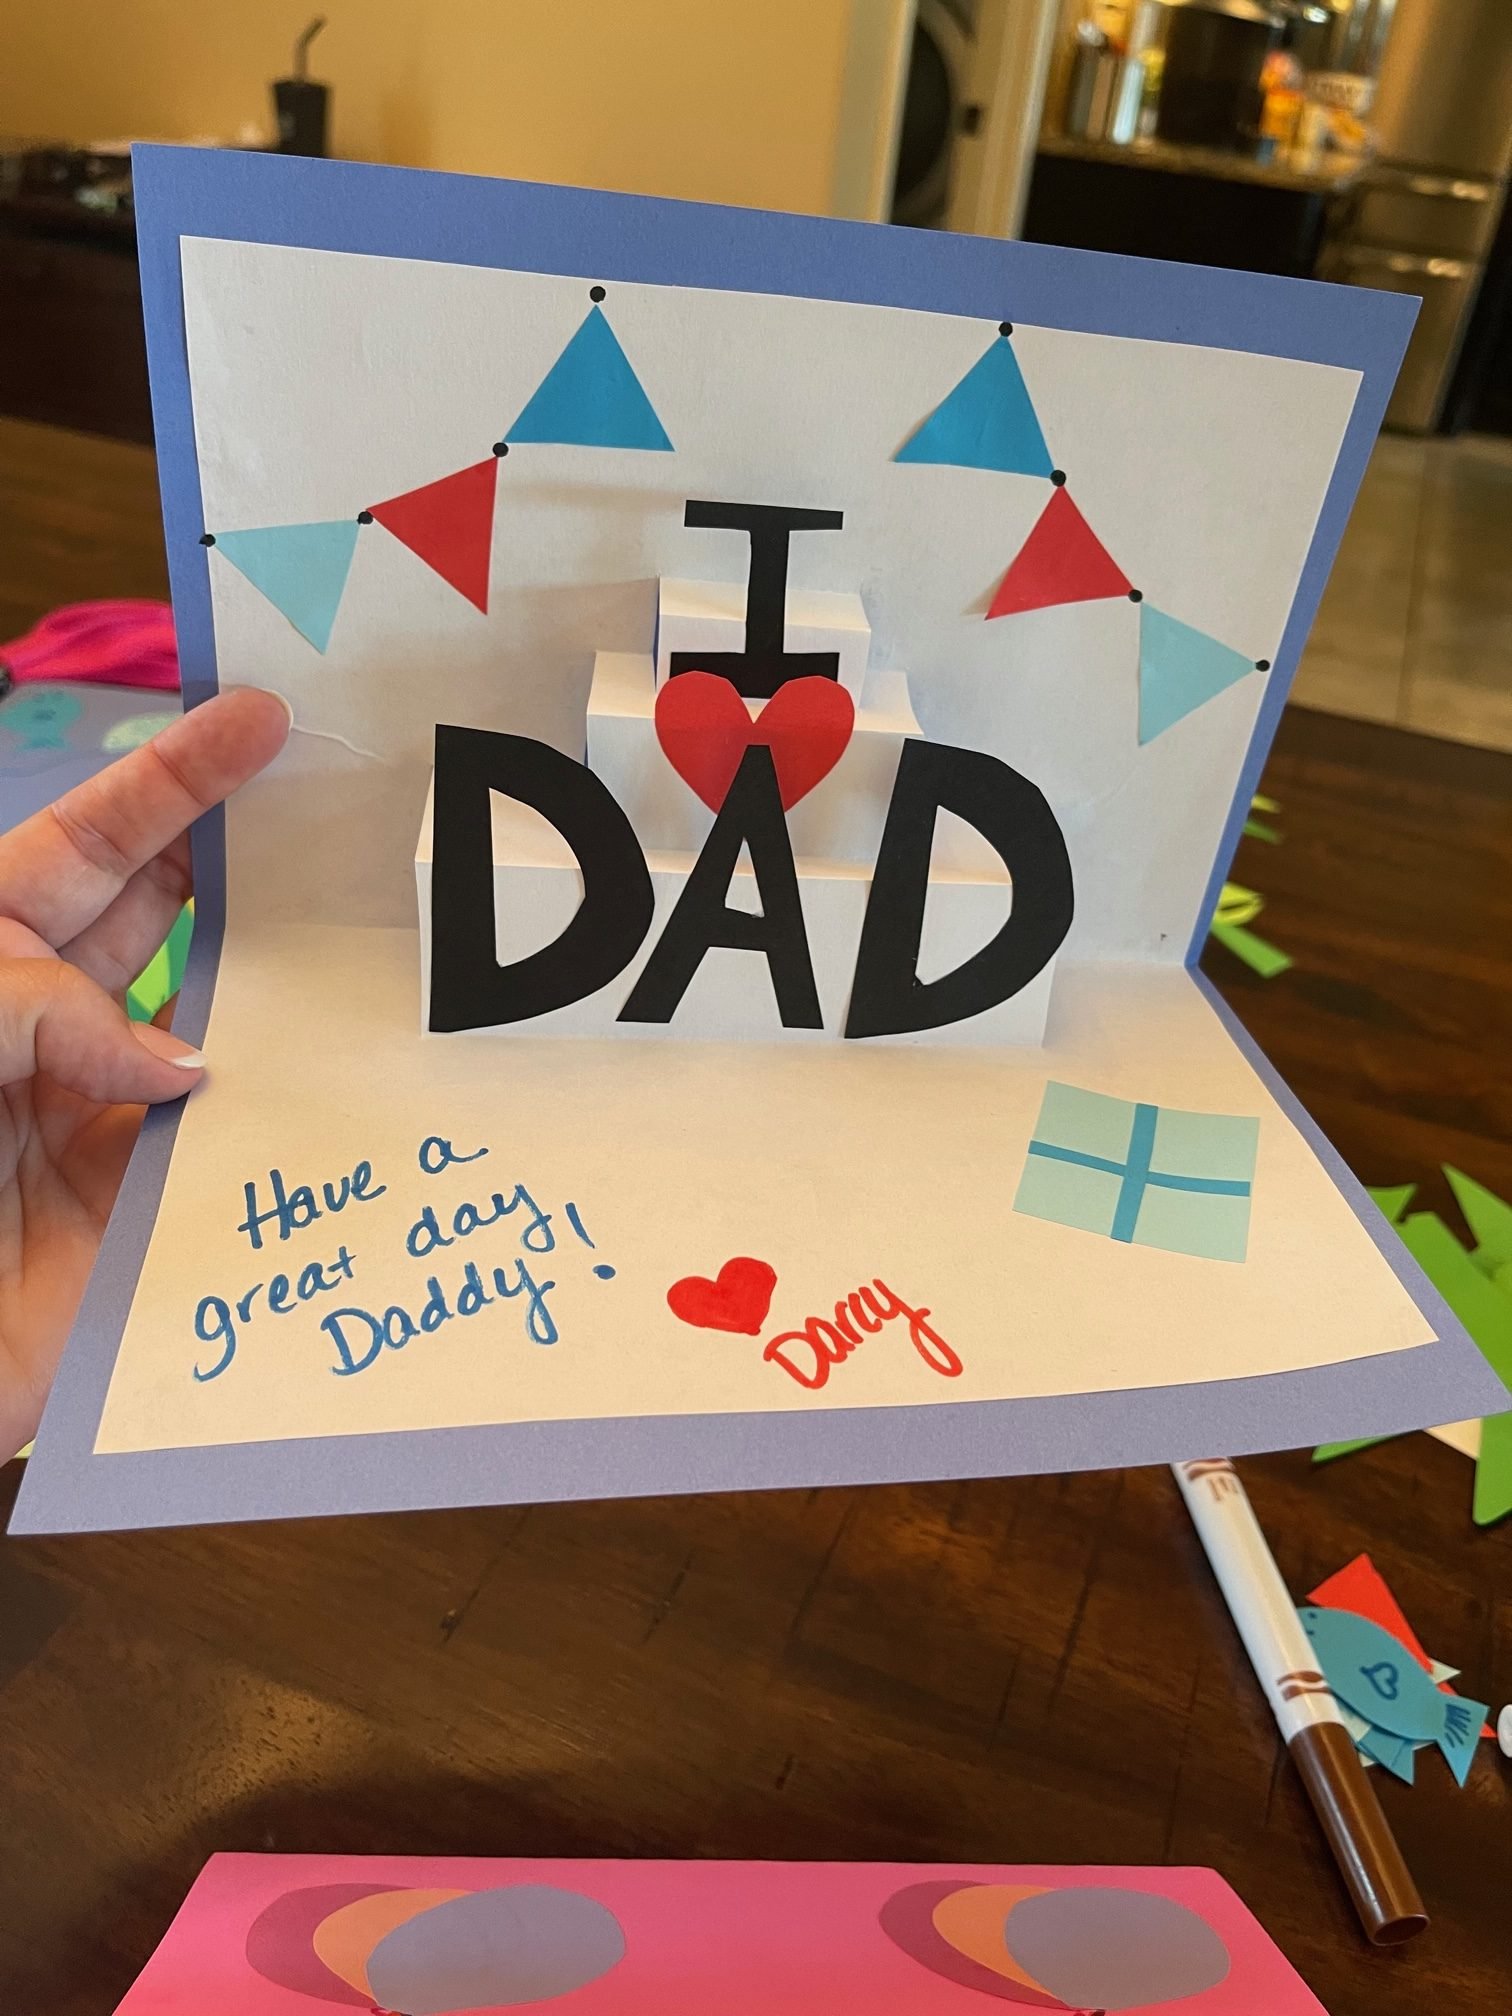 finished product of a fathers day card